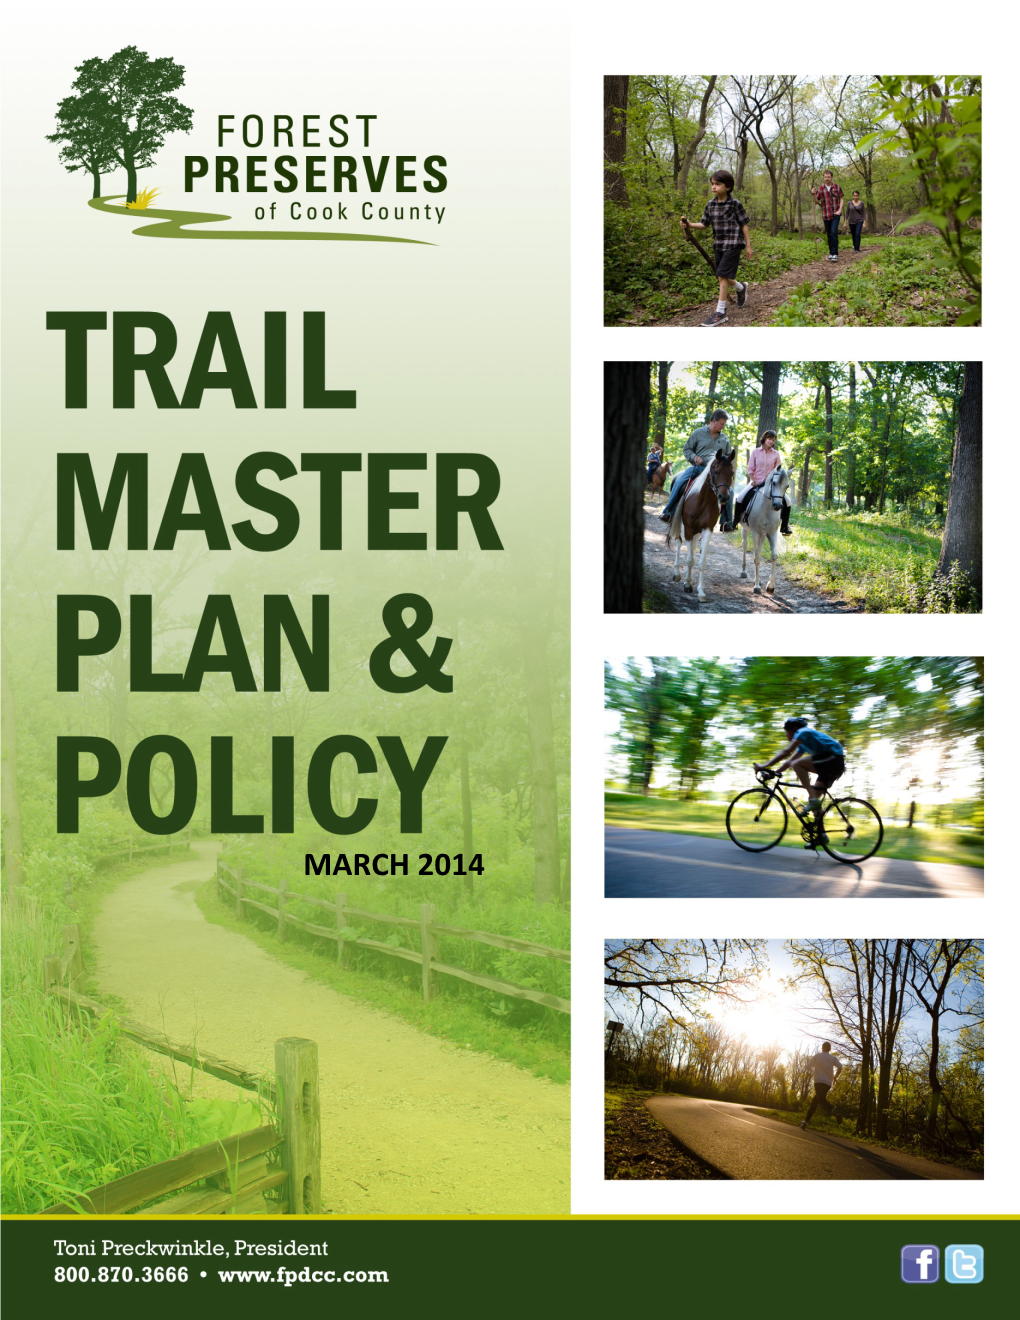 Trail Master Plan and Policy